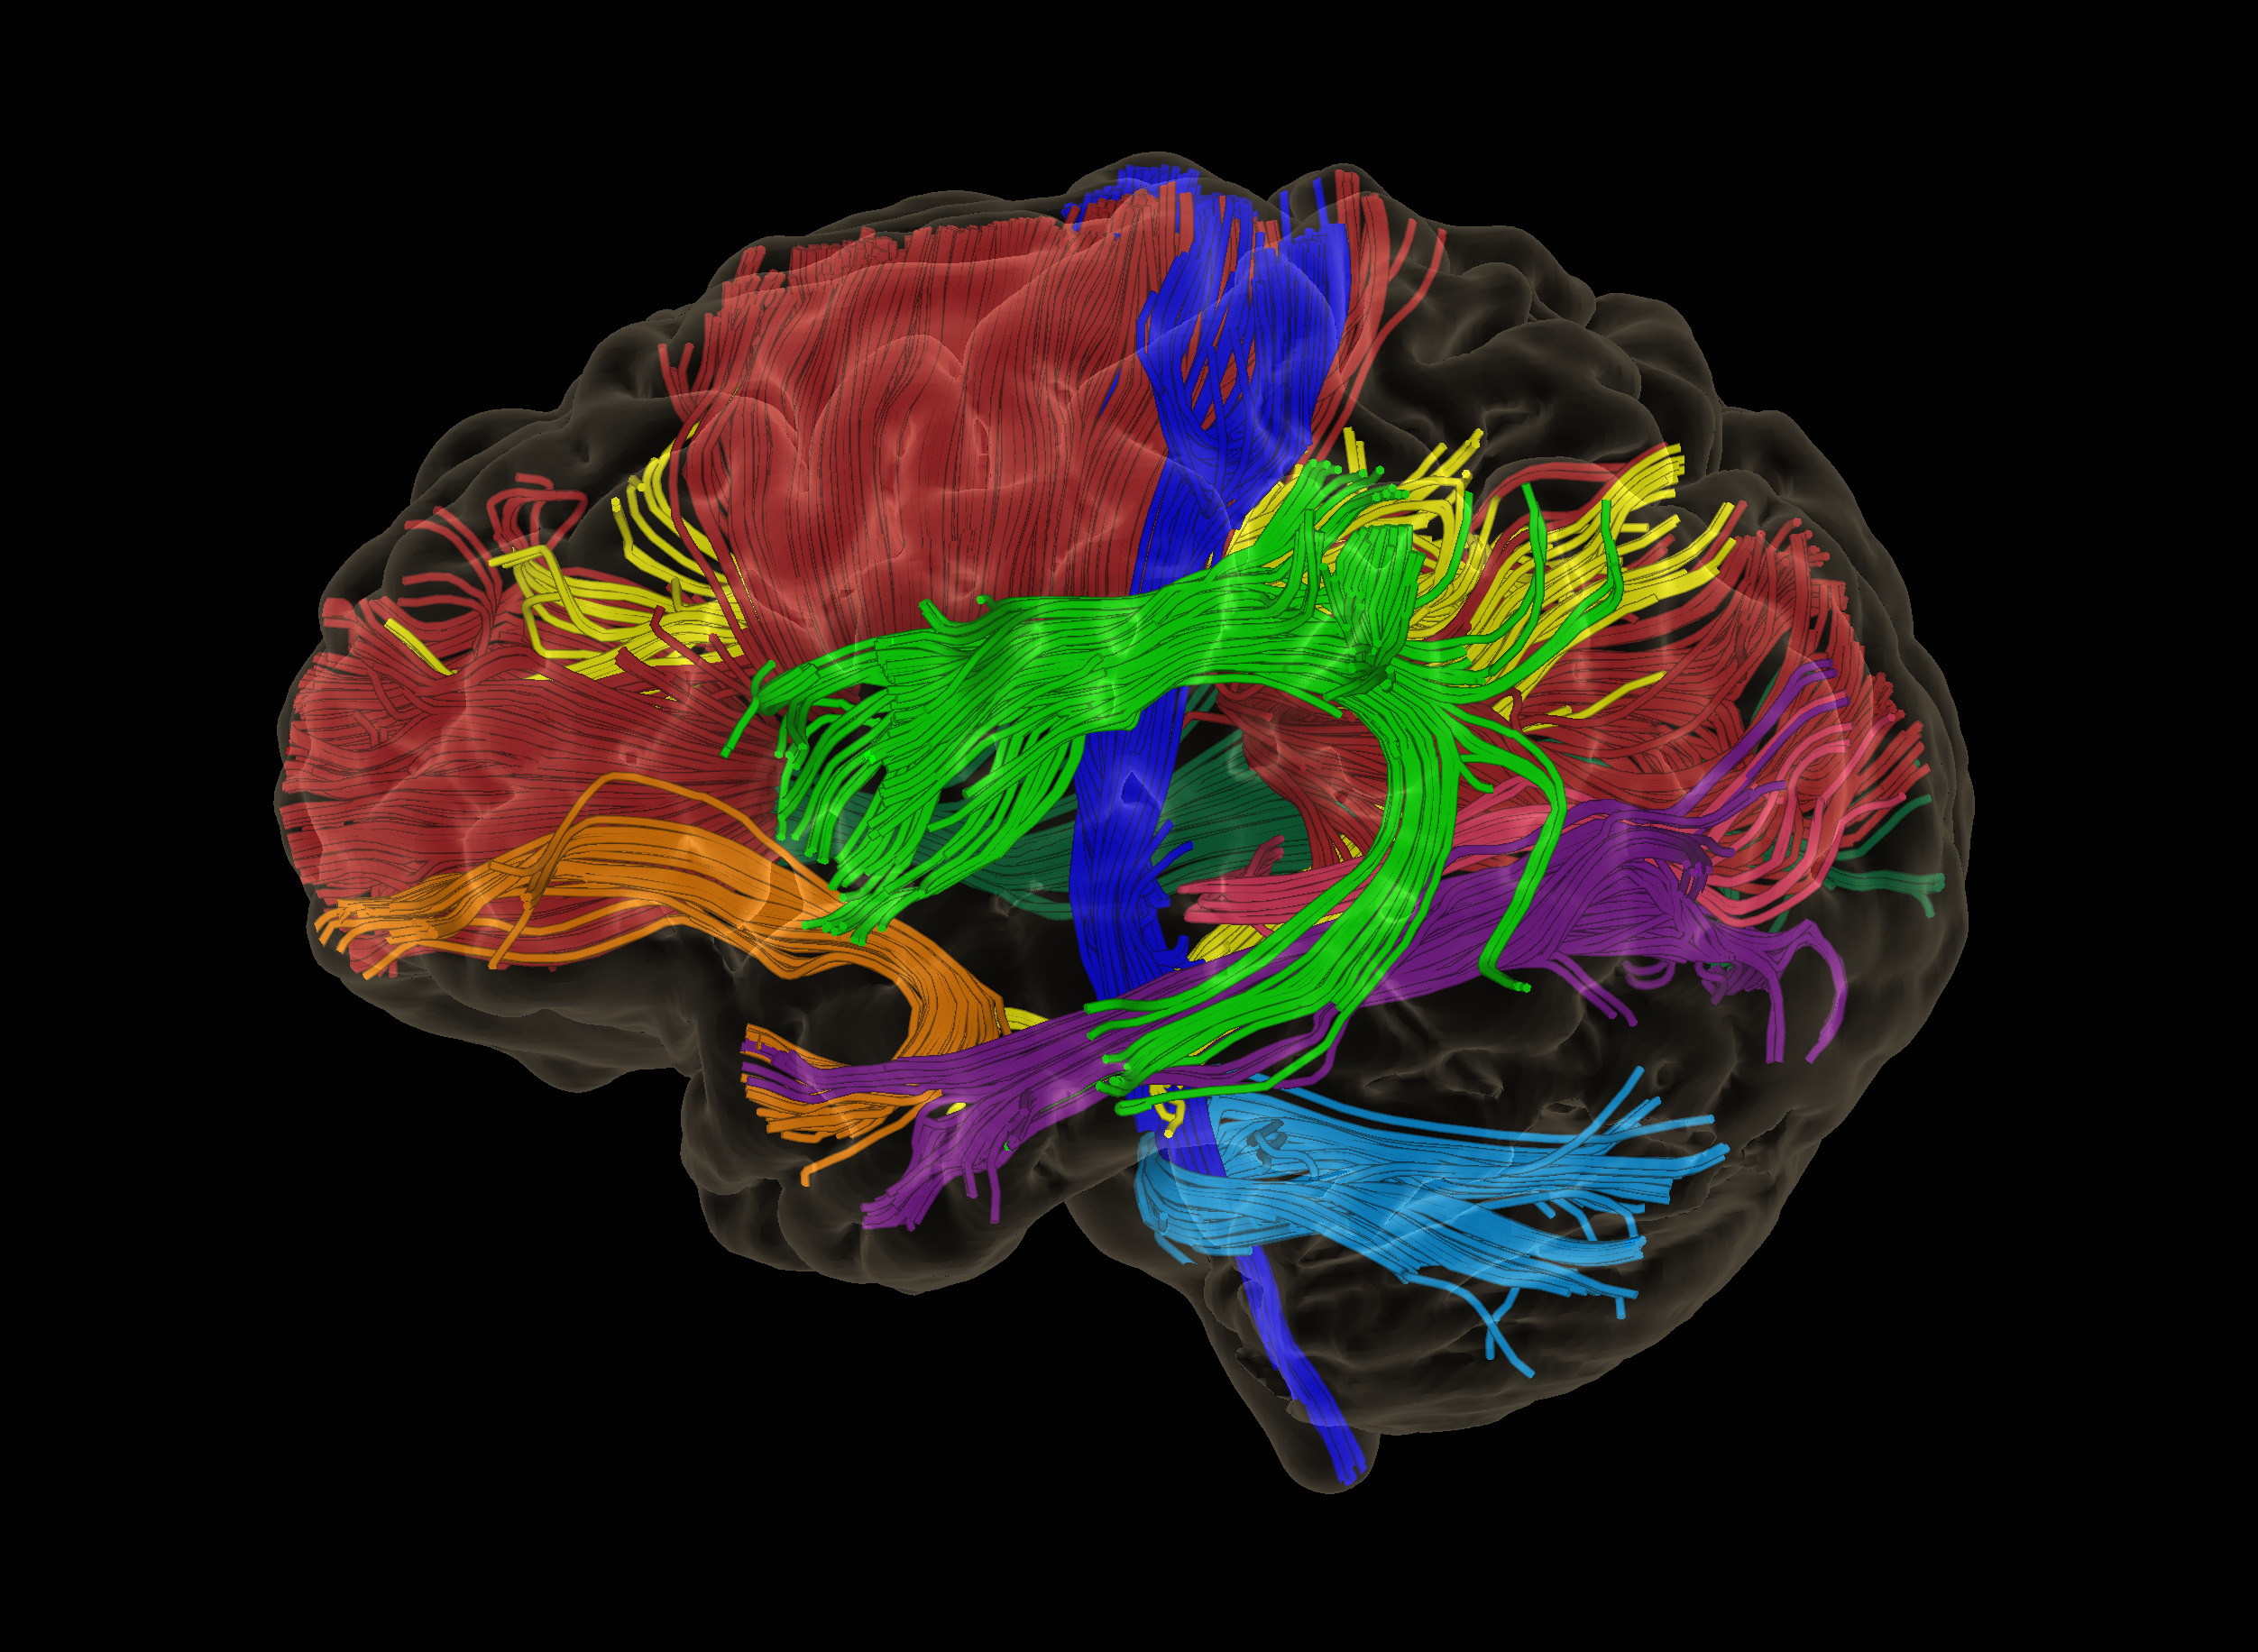 Screen shot of software, brightly colored brain